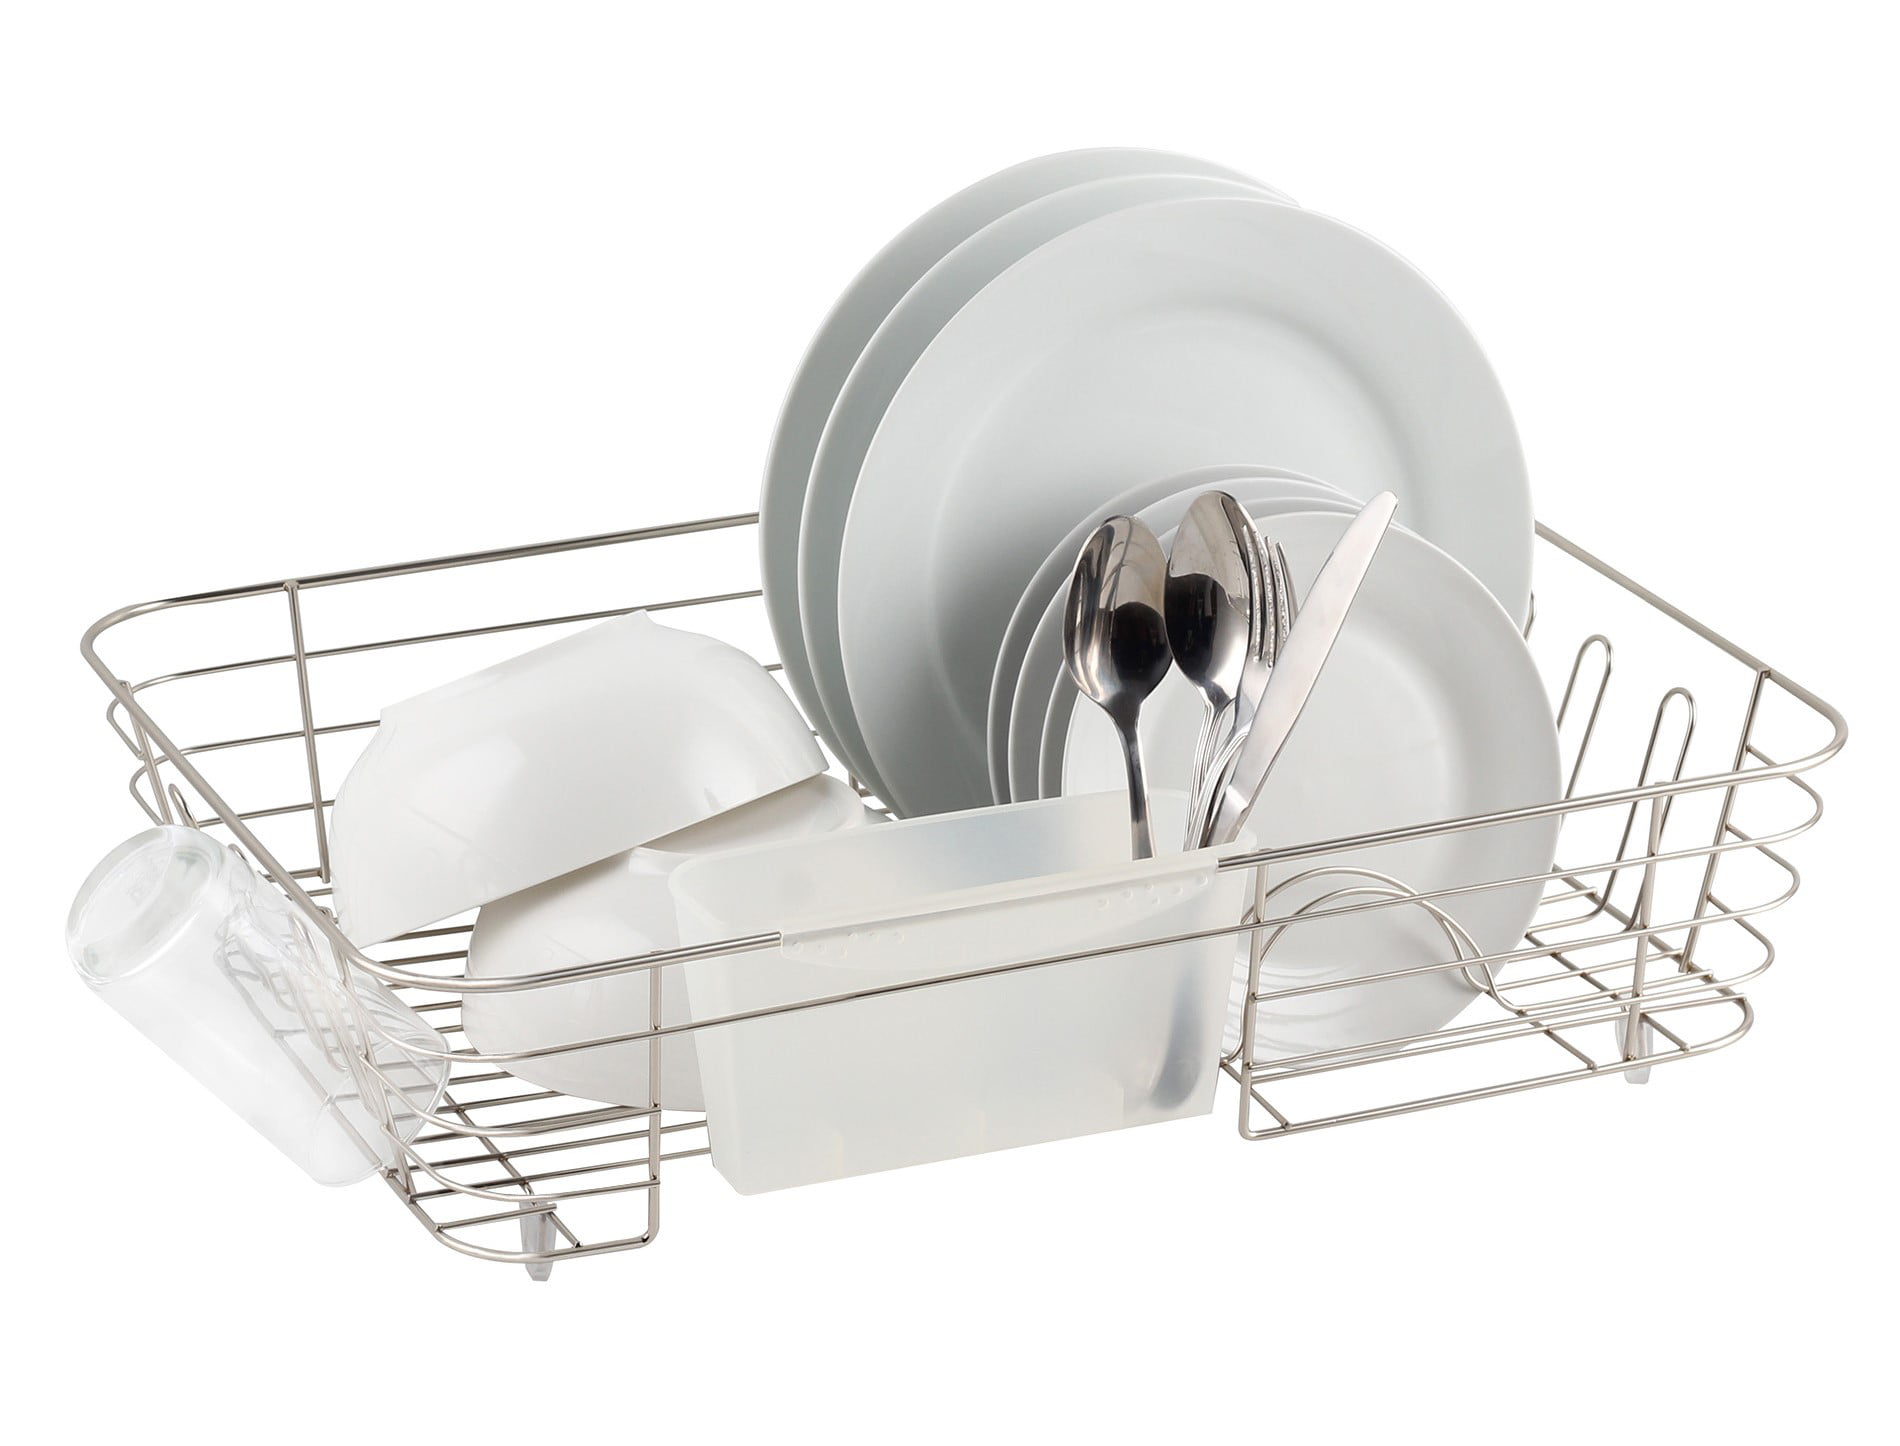 Real Home Innovations Extra Large Deluxe Dish Drainer, Nickel 